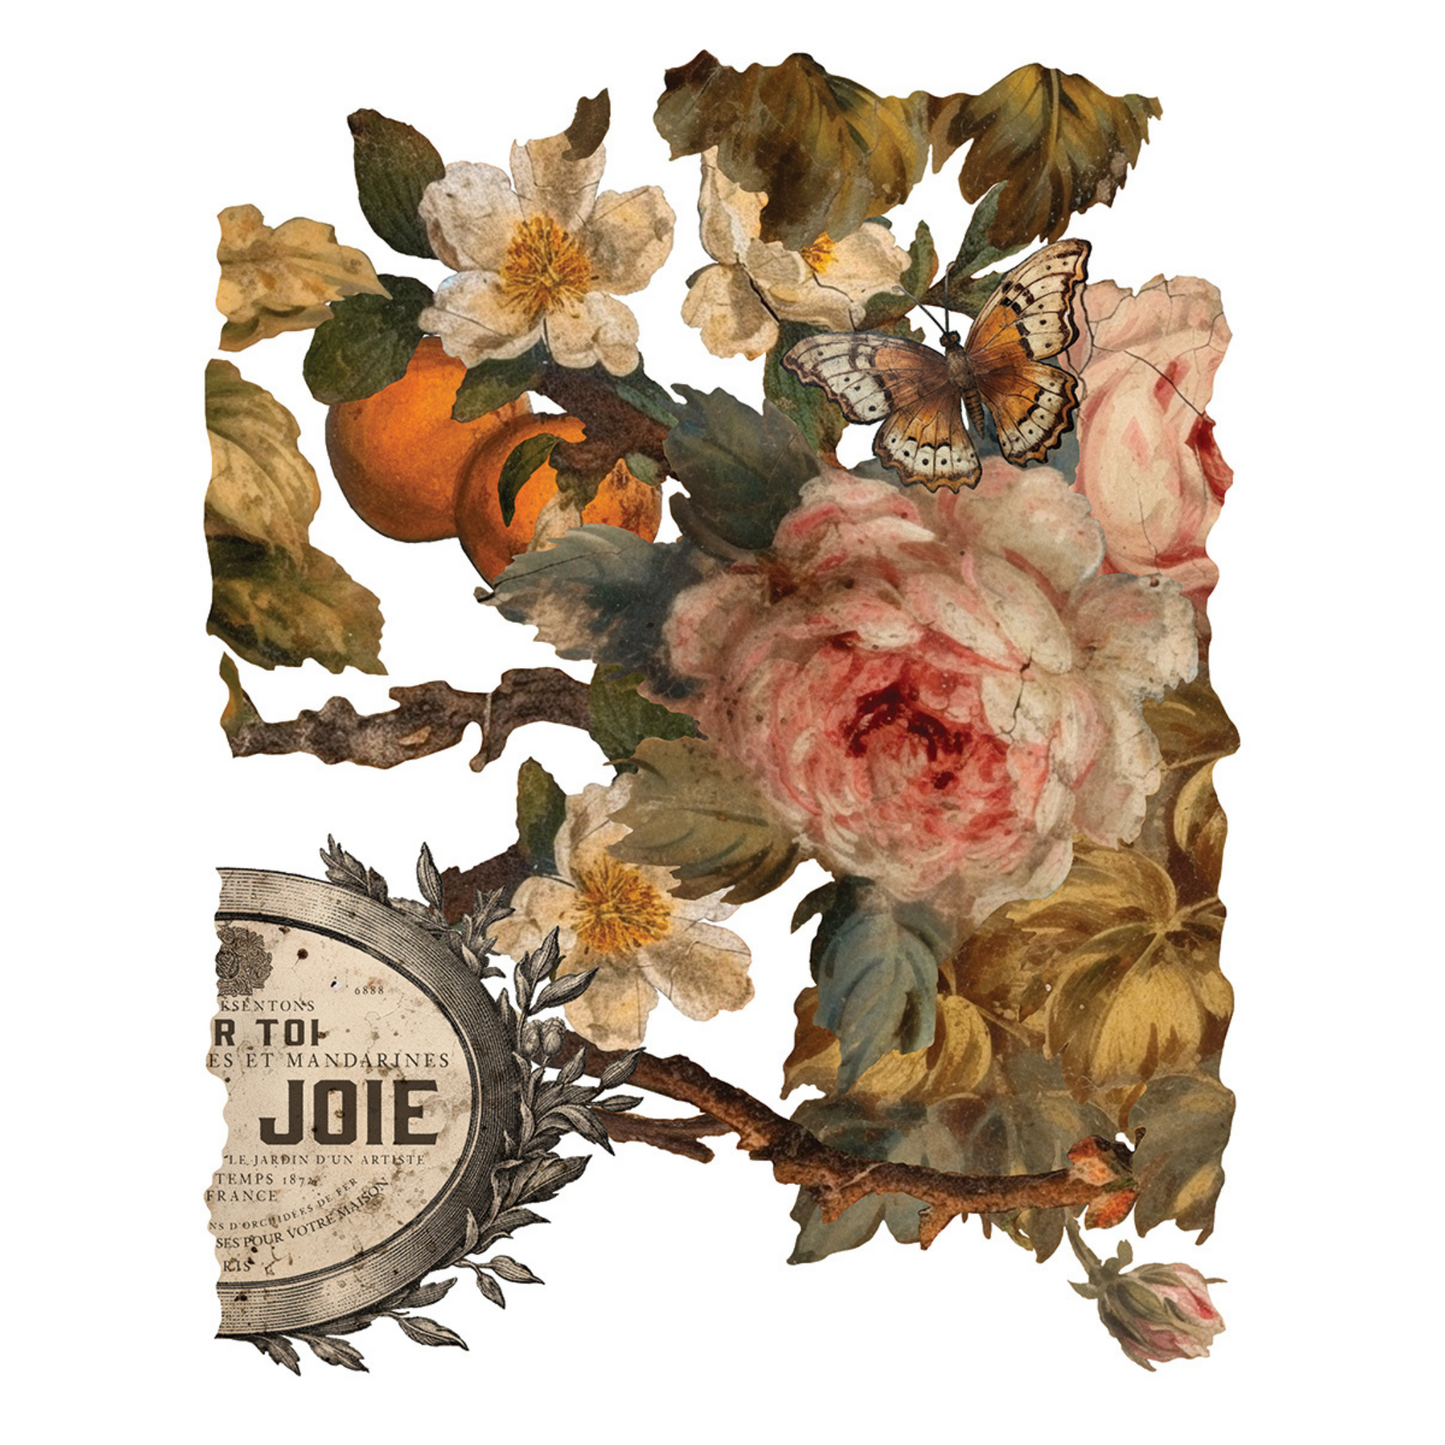 "Joie Des Roses" IOD rub-on transfer by Iron Orchid Designs. EIght 12" x 16" sheets.  Page 7 of 8. Available at Milton's Daughter.